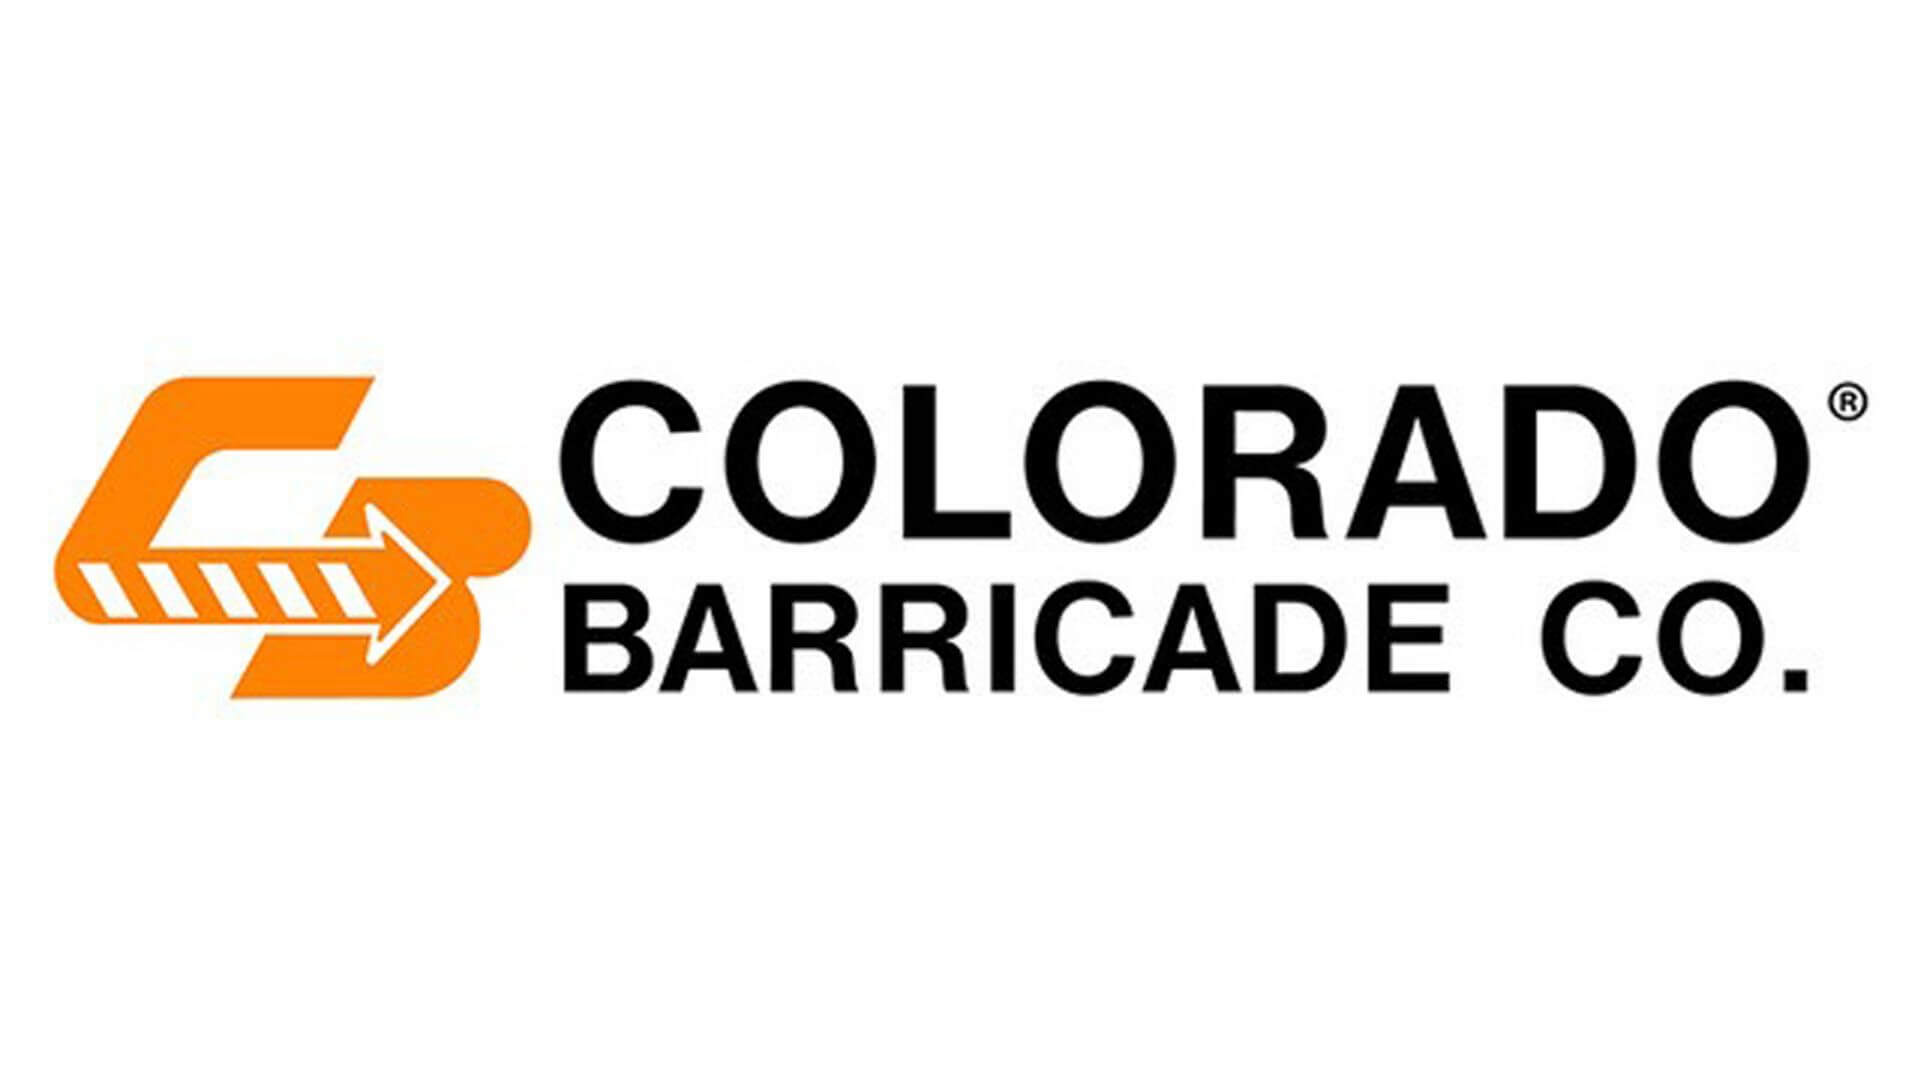 Colorado Barricade Expands into Washington State with the Acquisition of Leading Road Safety Services Company, Pavement Surface Control